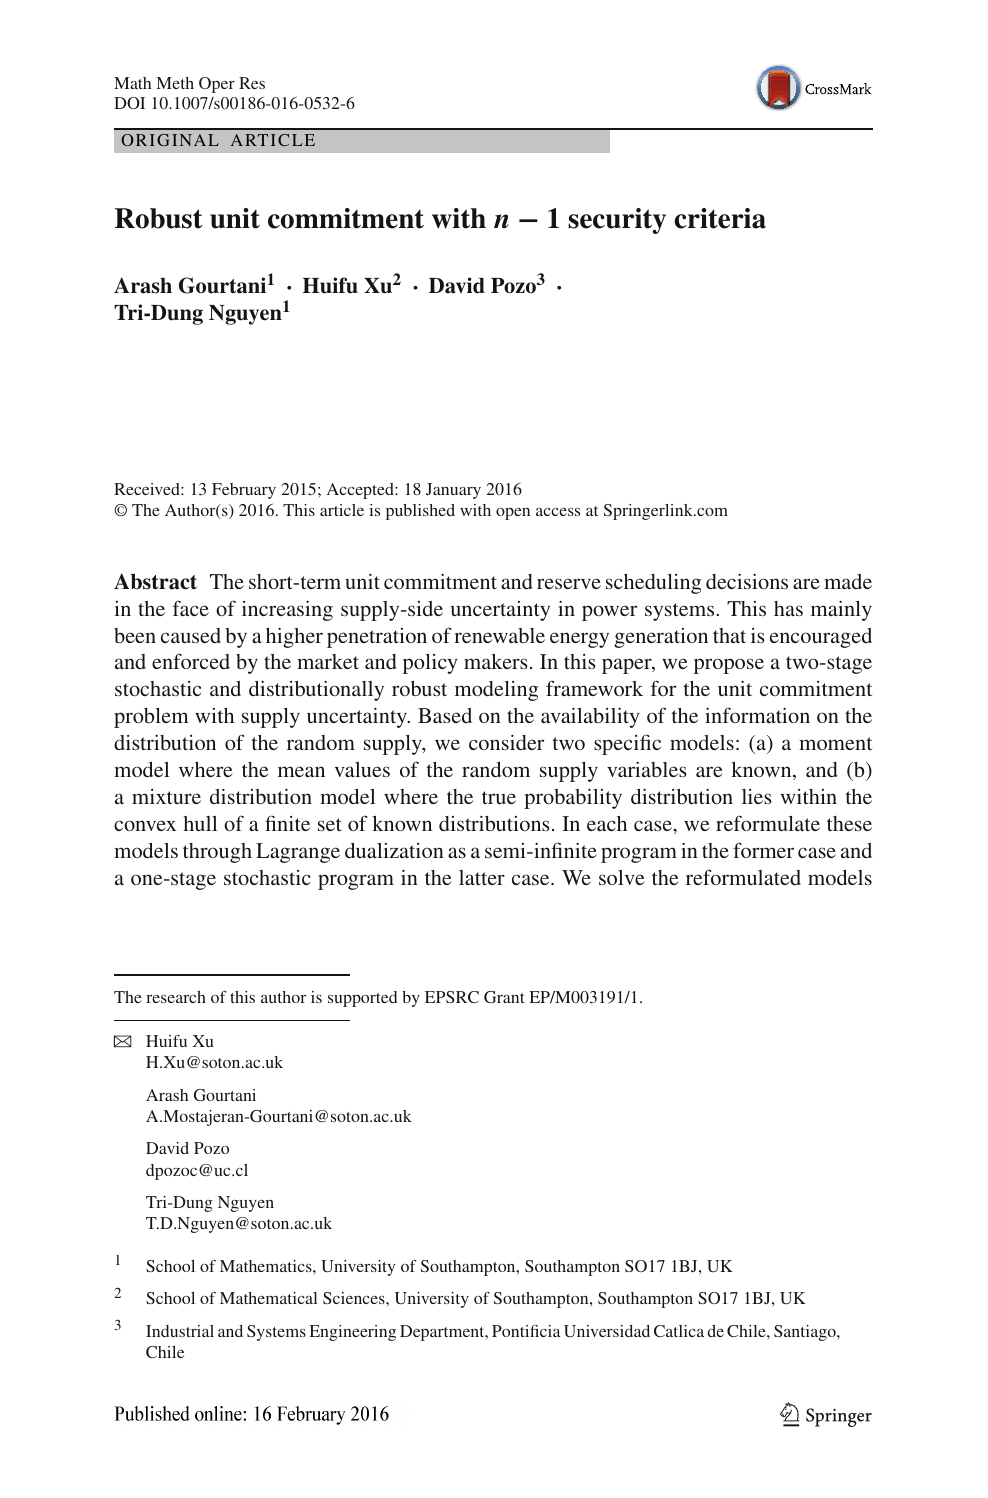 Robust Unit Commitment With N 1 N 1 Security Criteria Topic Of Research Paper In Mathematics Download Scholarly Article Pdf And Read For Free On Cyberleninka Open Science Hub